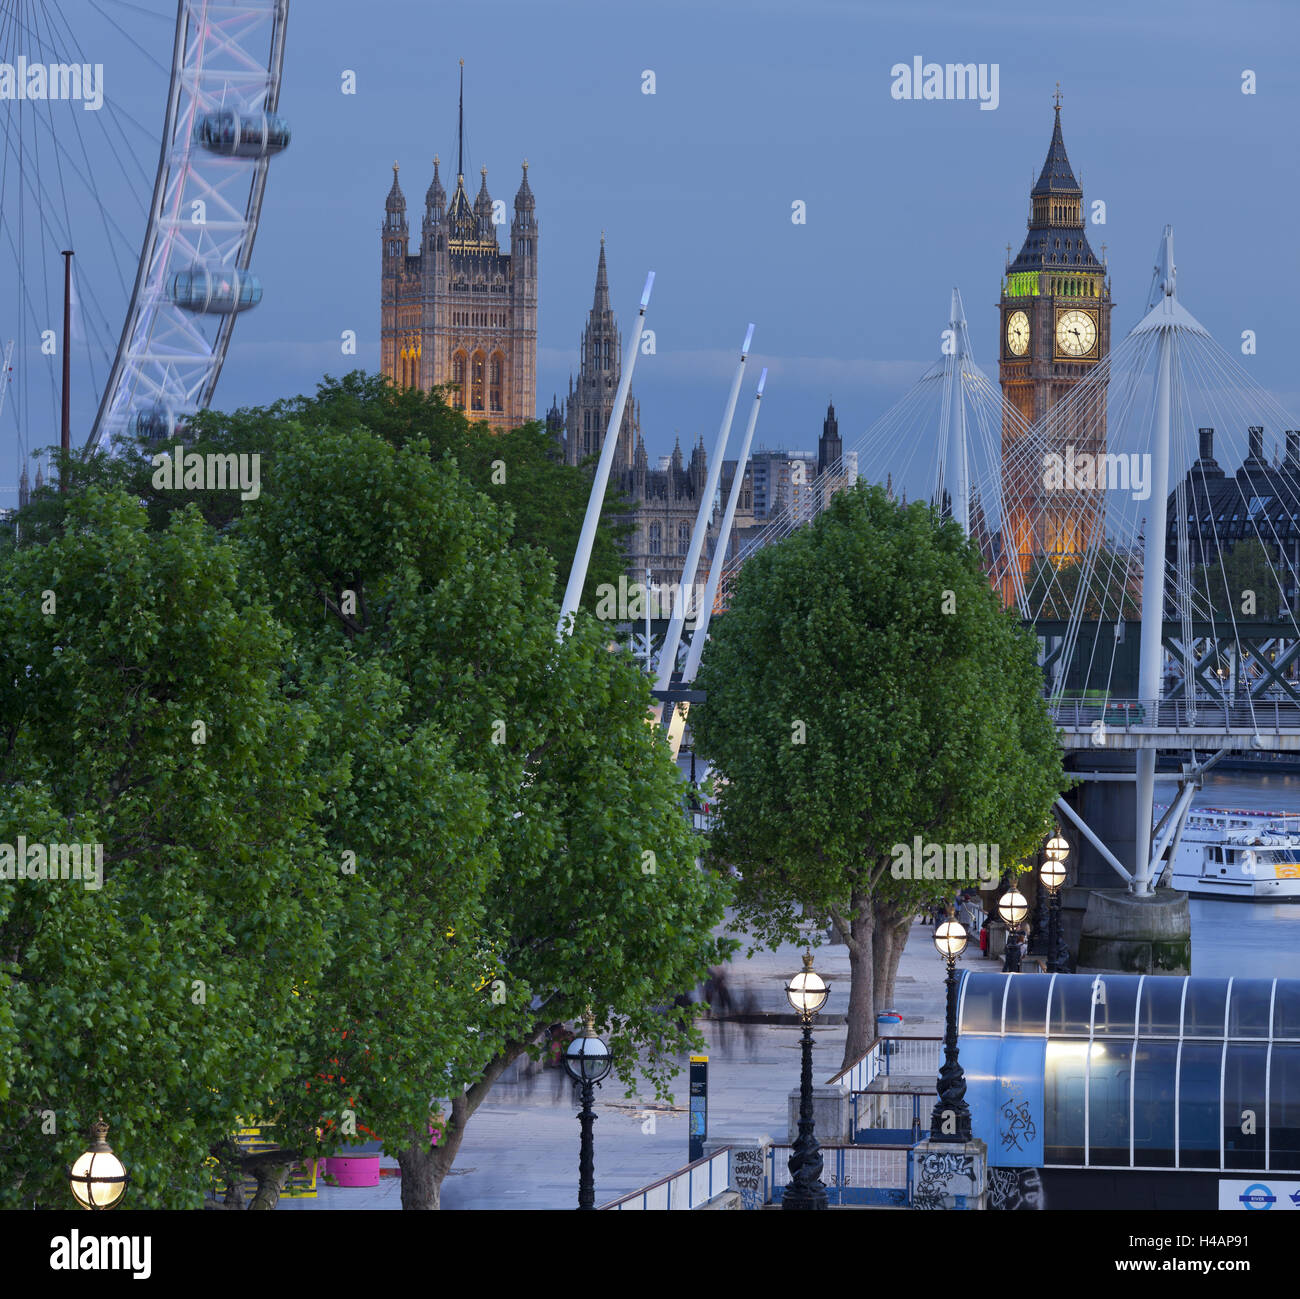 River Thames shore, in the evening, Westminster Palace, Big Ben, London Eye, Hungerford Bridge, detail, London, England, Great Britain, Stock Photo